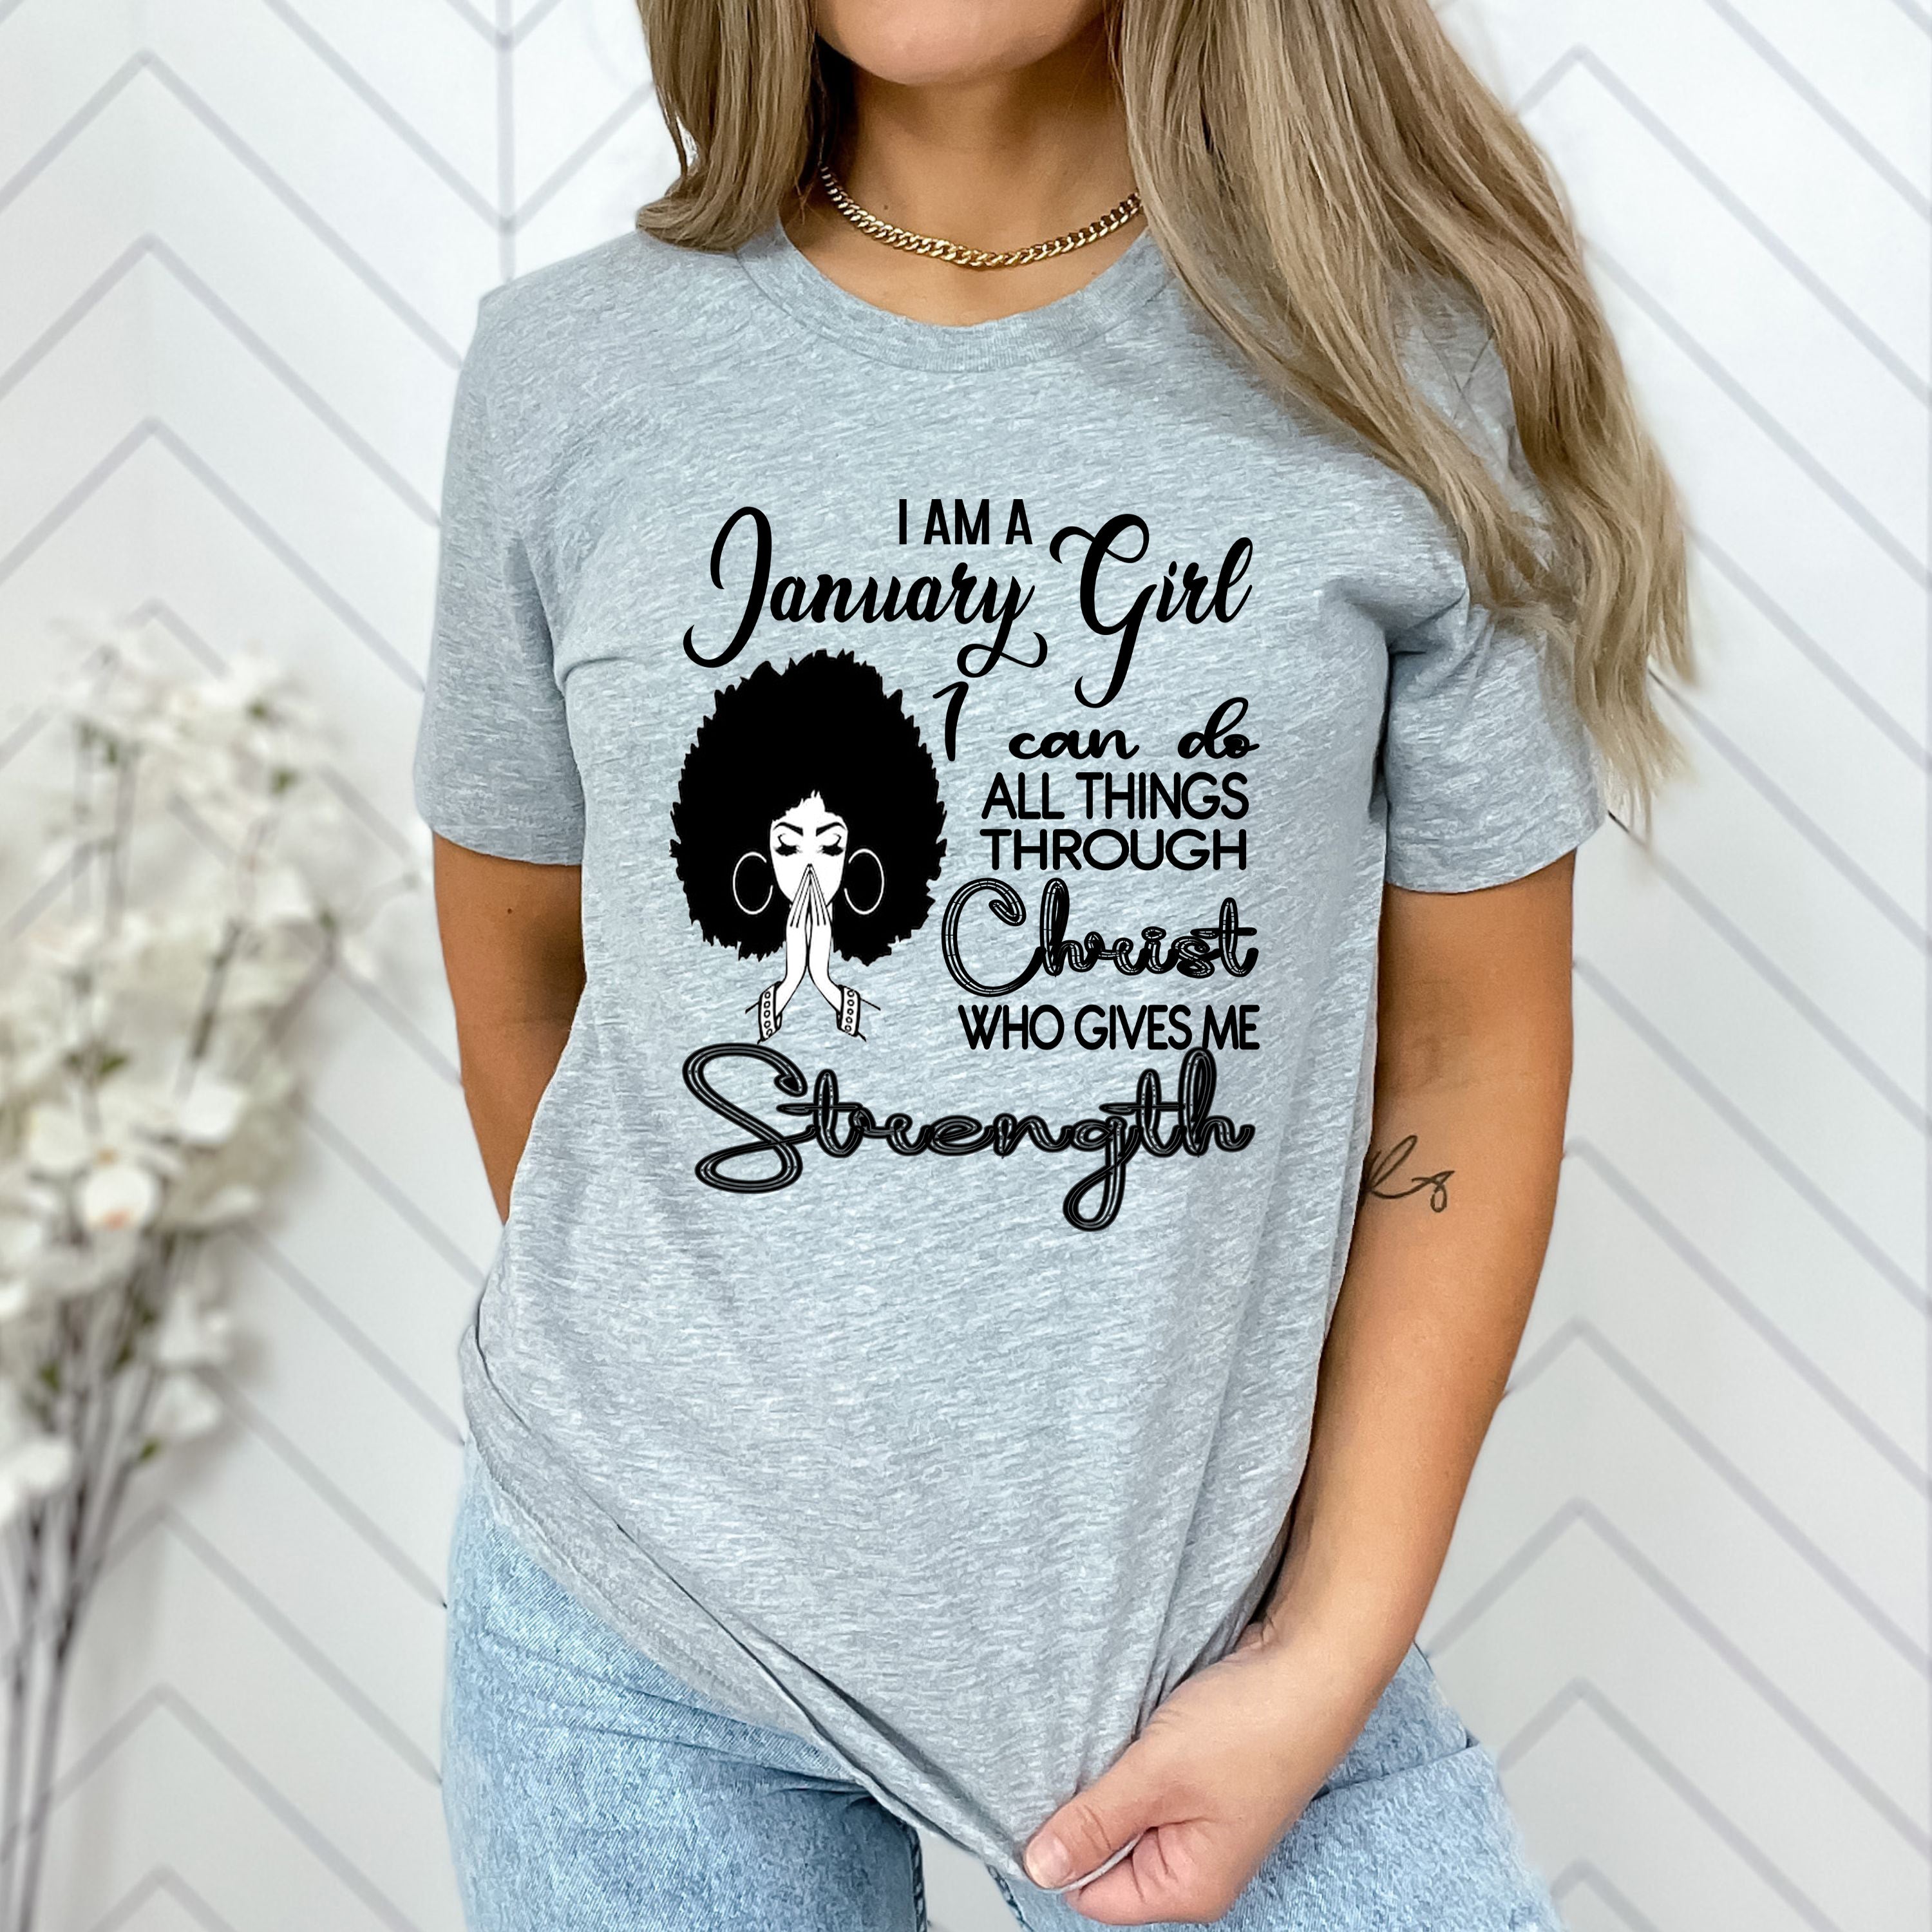 "JANUARY GIRL Can Do All Things Through Christ Who Gives Me Strength",T-Shirt.